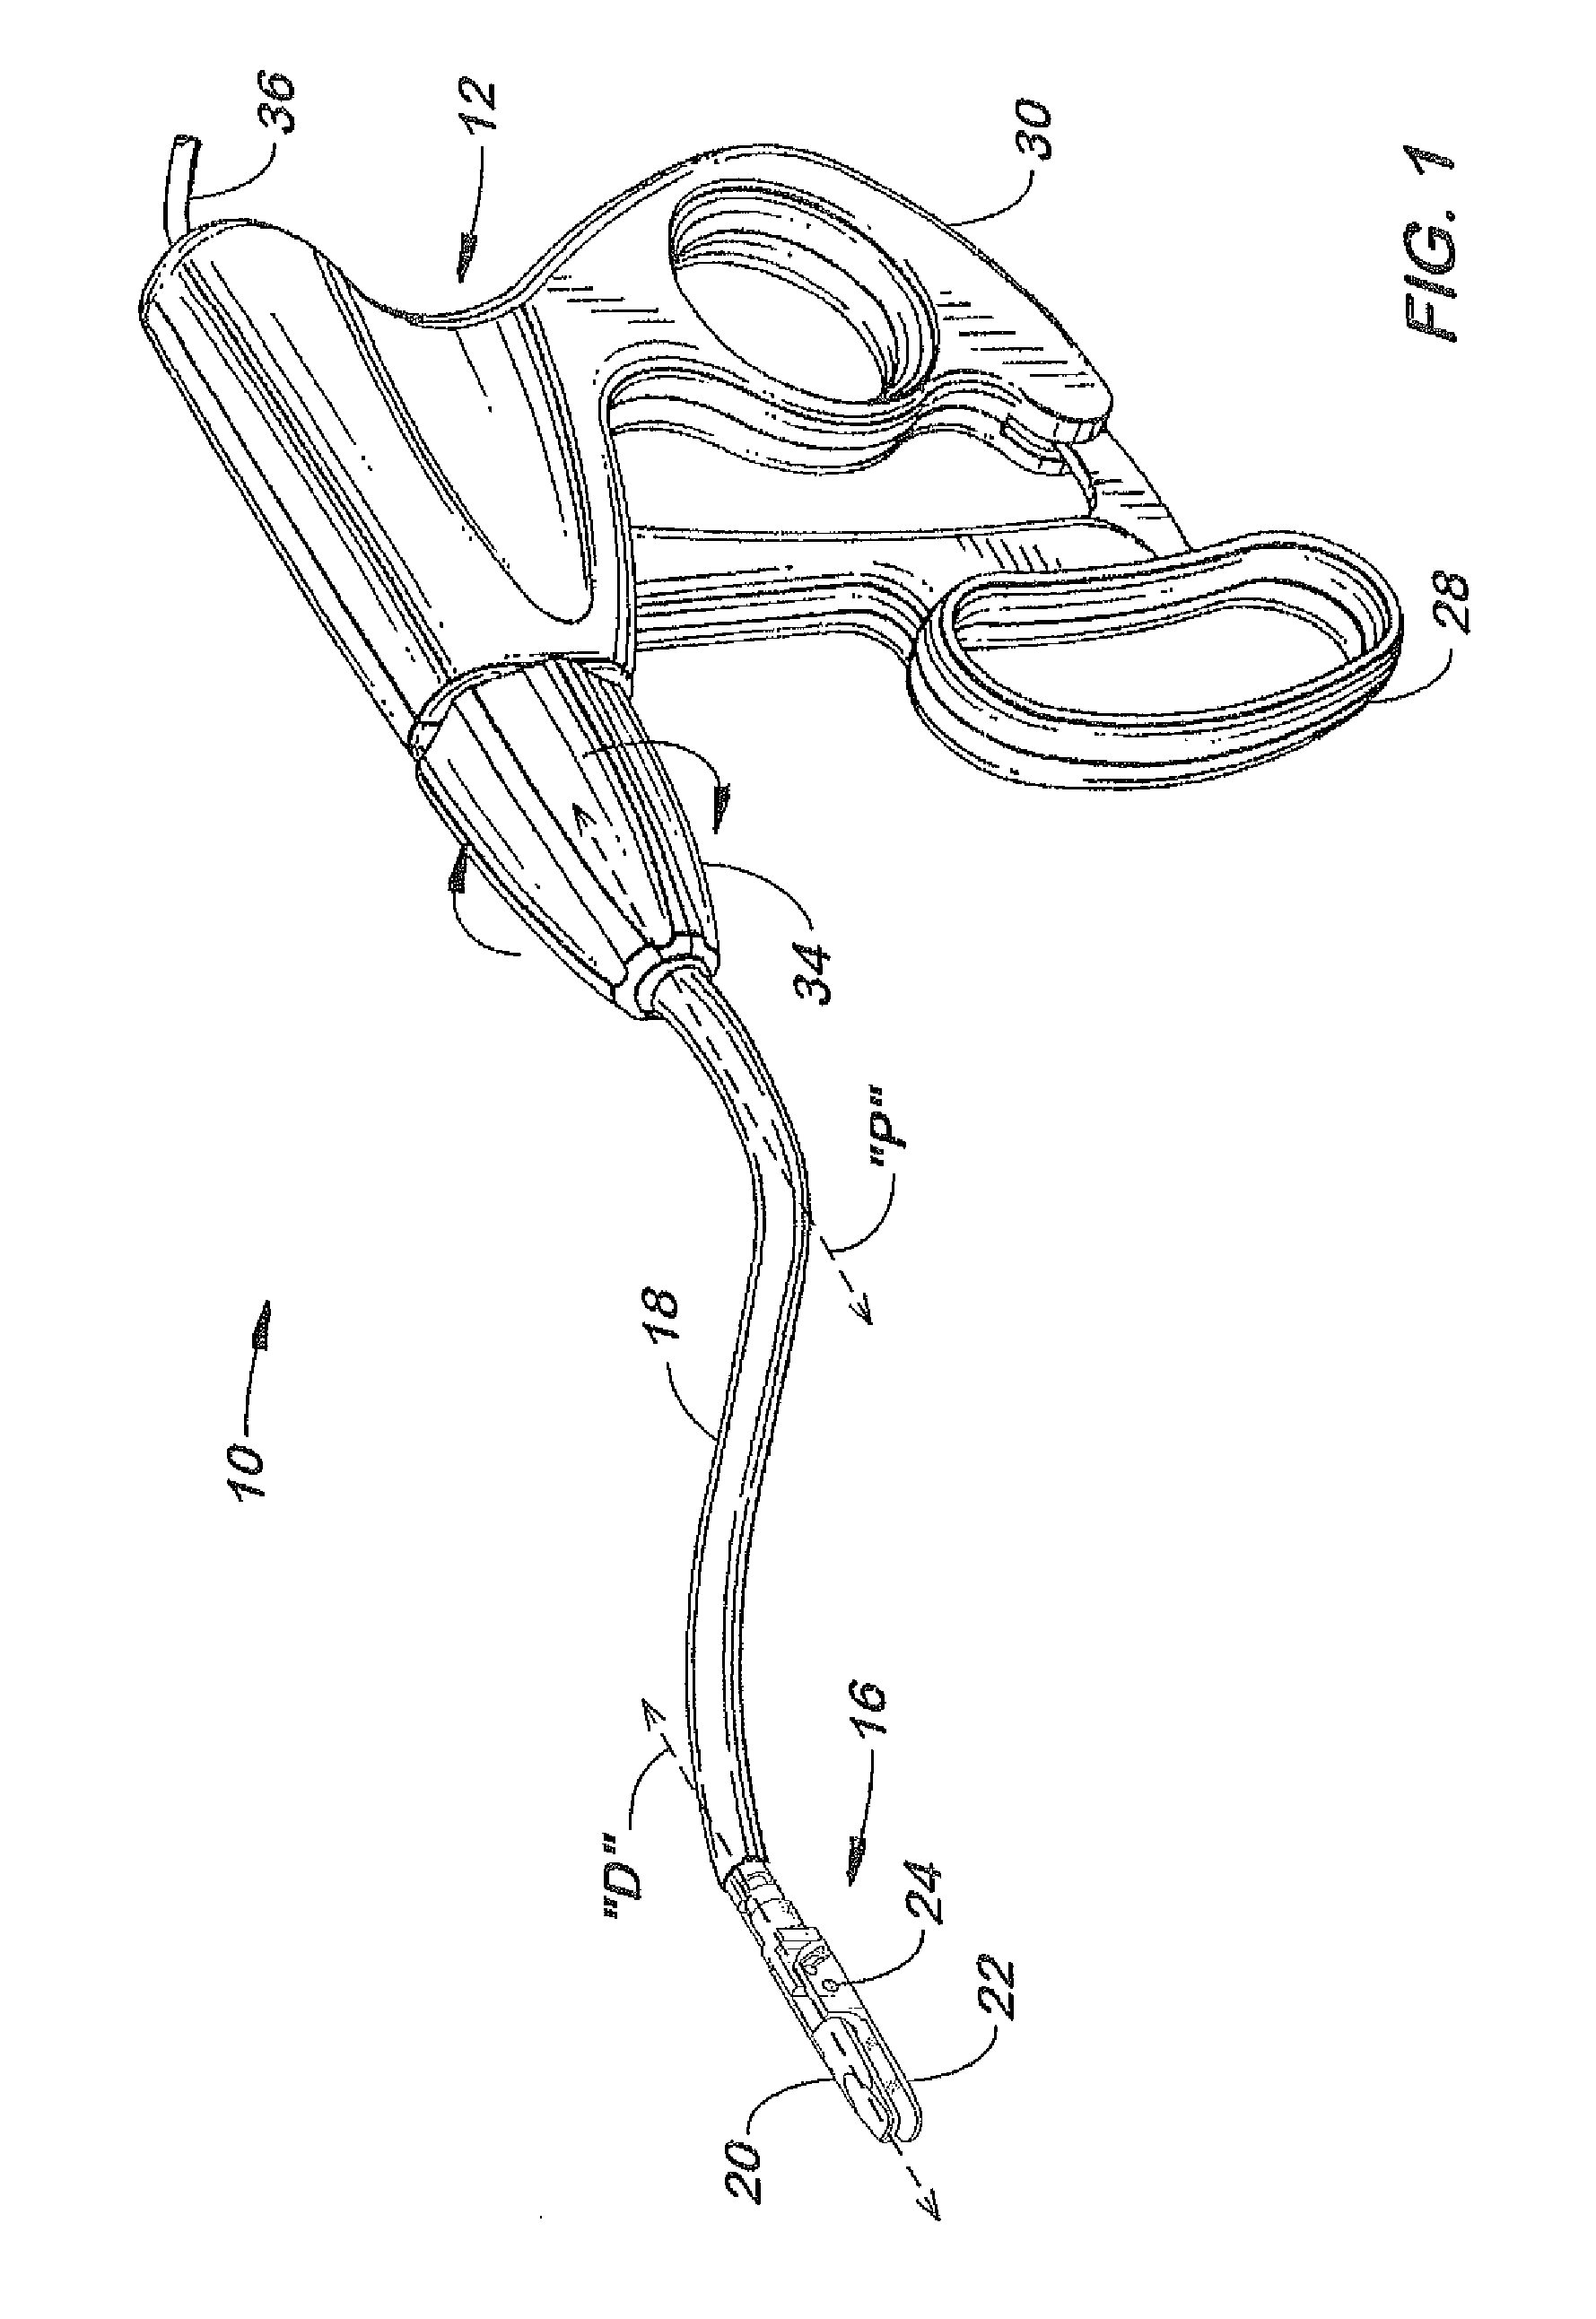 Method of Transferring Force Using Flexible Fluid-Filled Tubing in an Articulating Surgical Instrument